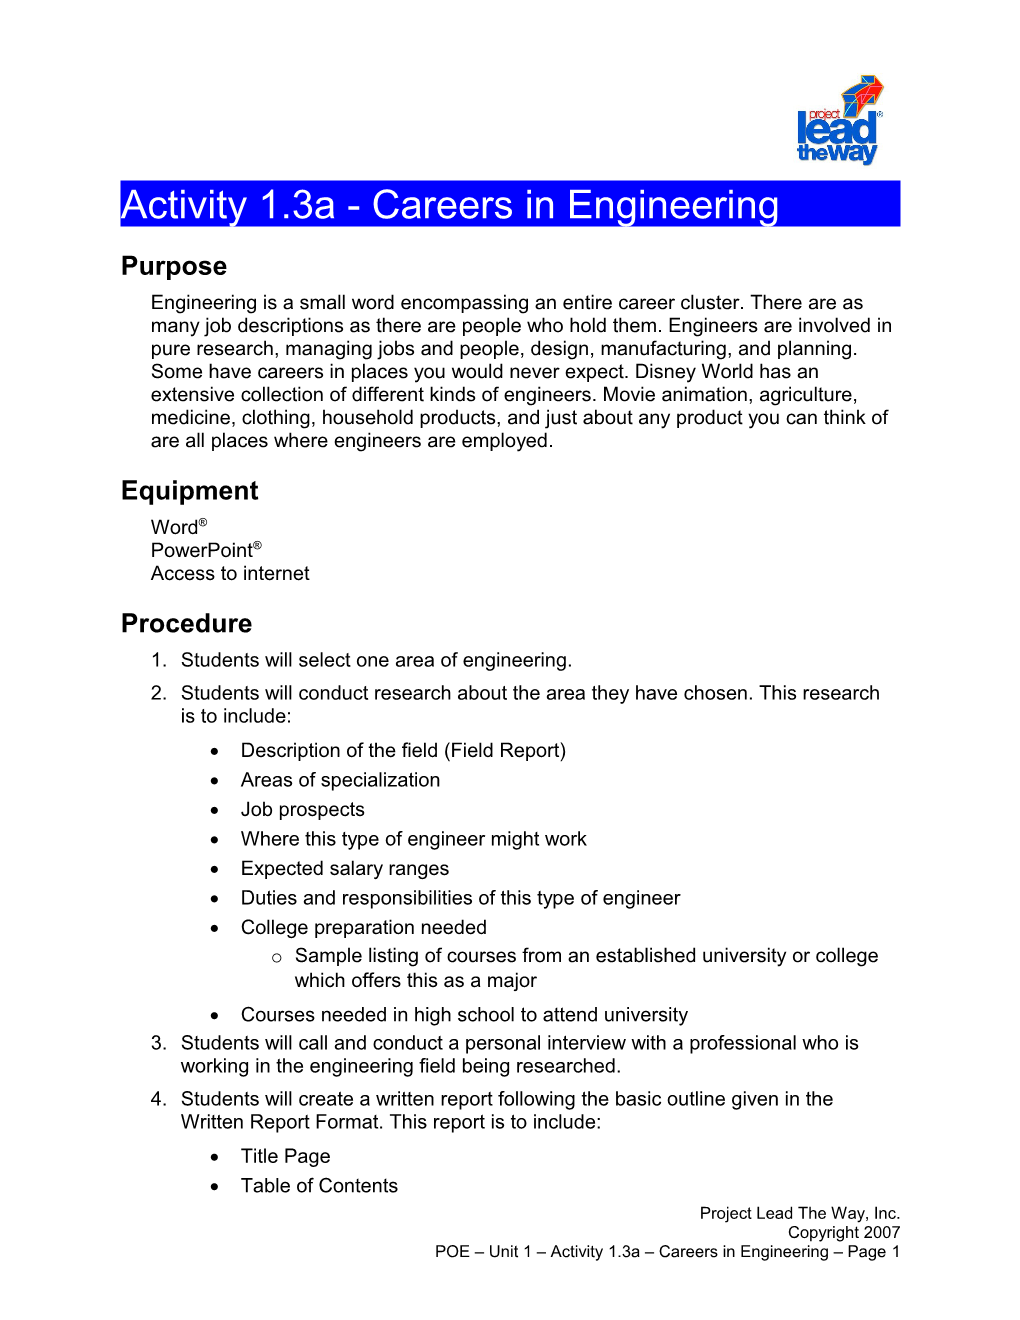 Activity 1.3A - Careers in Engineering